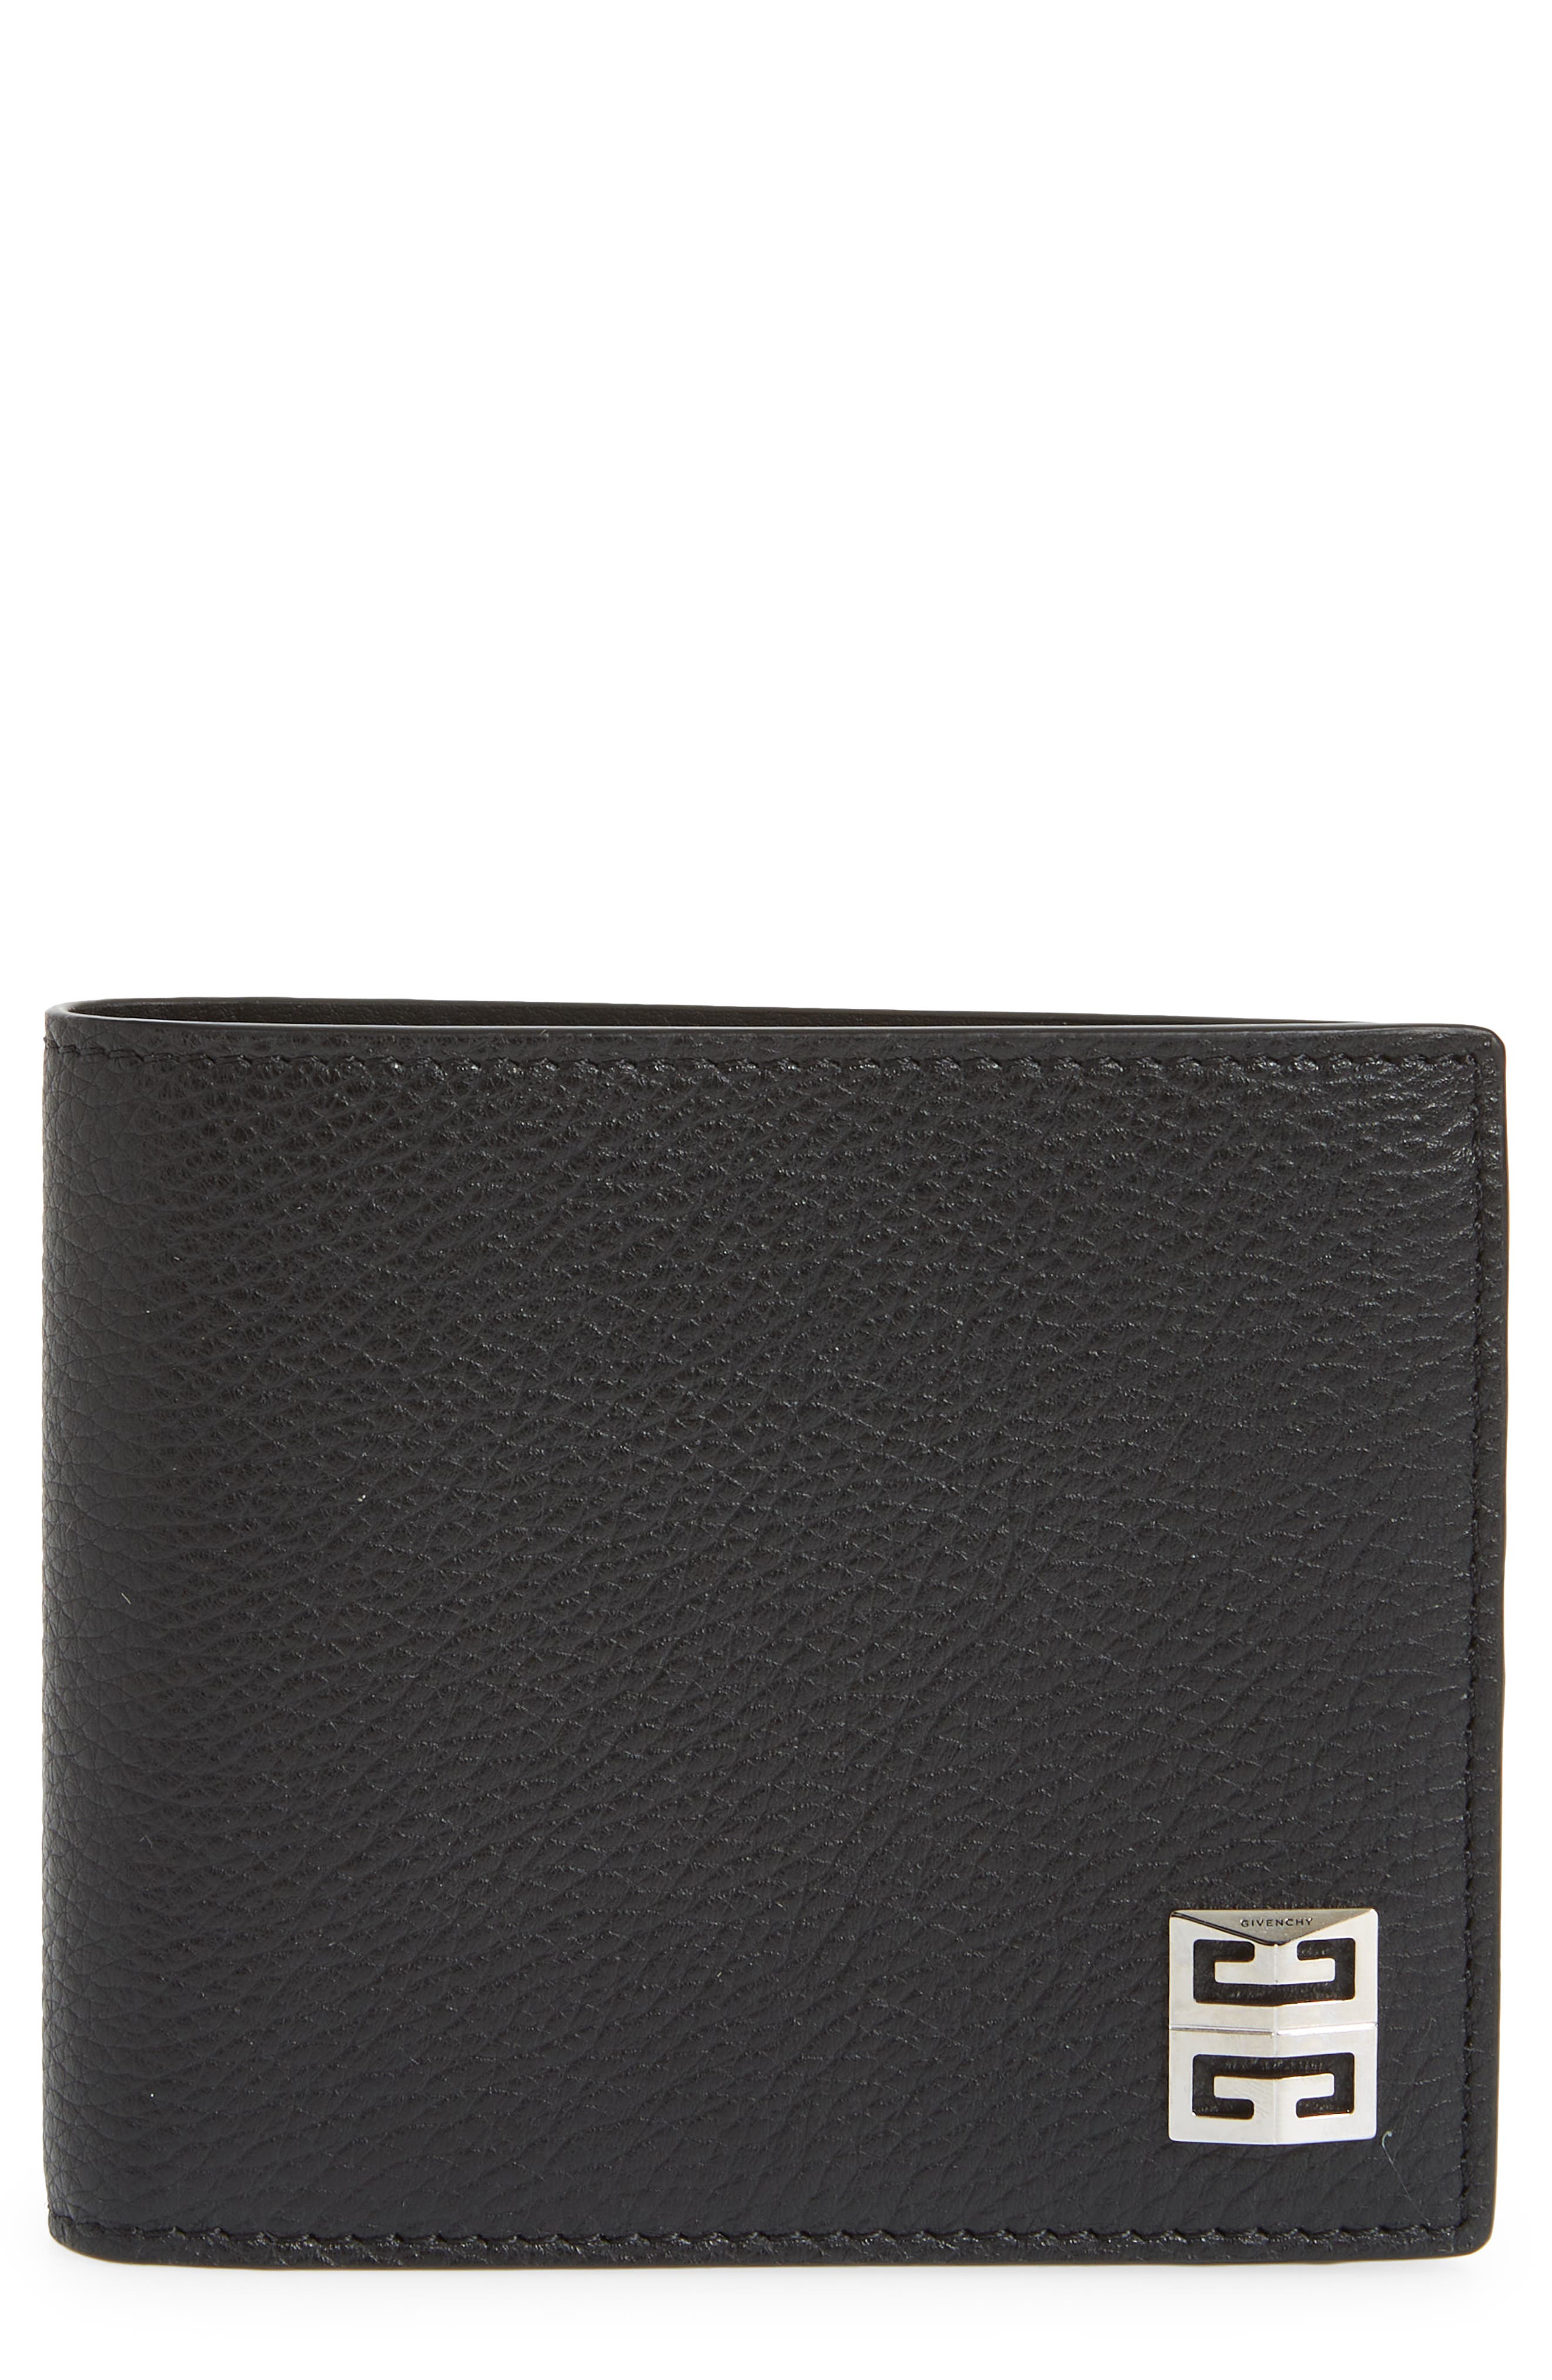 Givenchy 4G Bifold Calfskin Leather Wallet in Black at Nordstrom